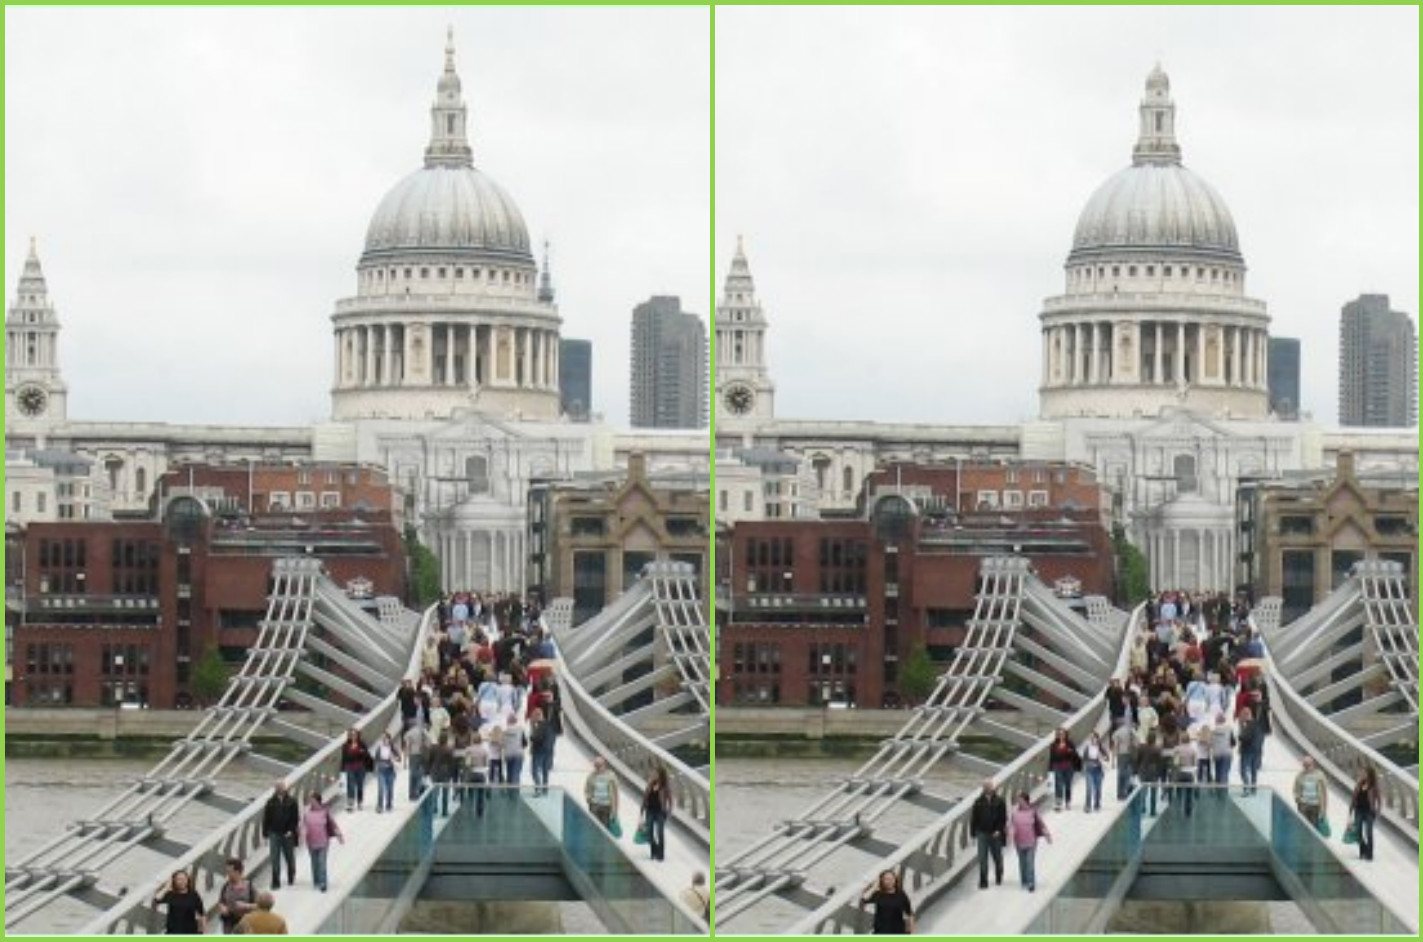 Finding 4 Differences Between These Two Images Can Power Up Your Brain, Research Finds